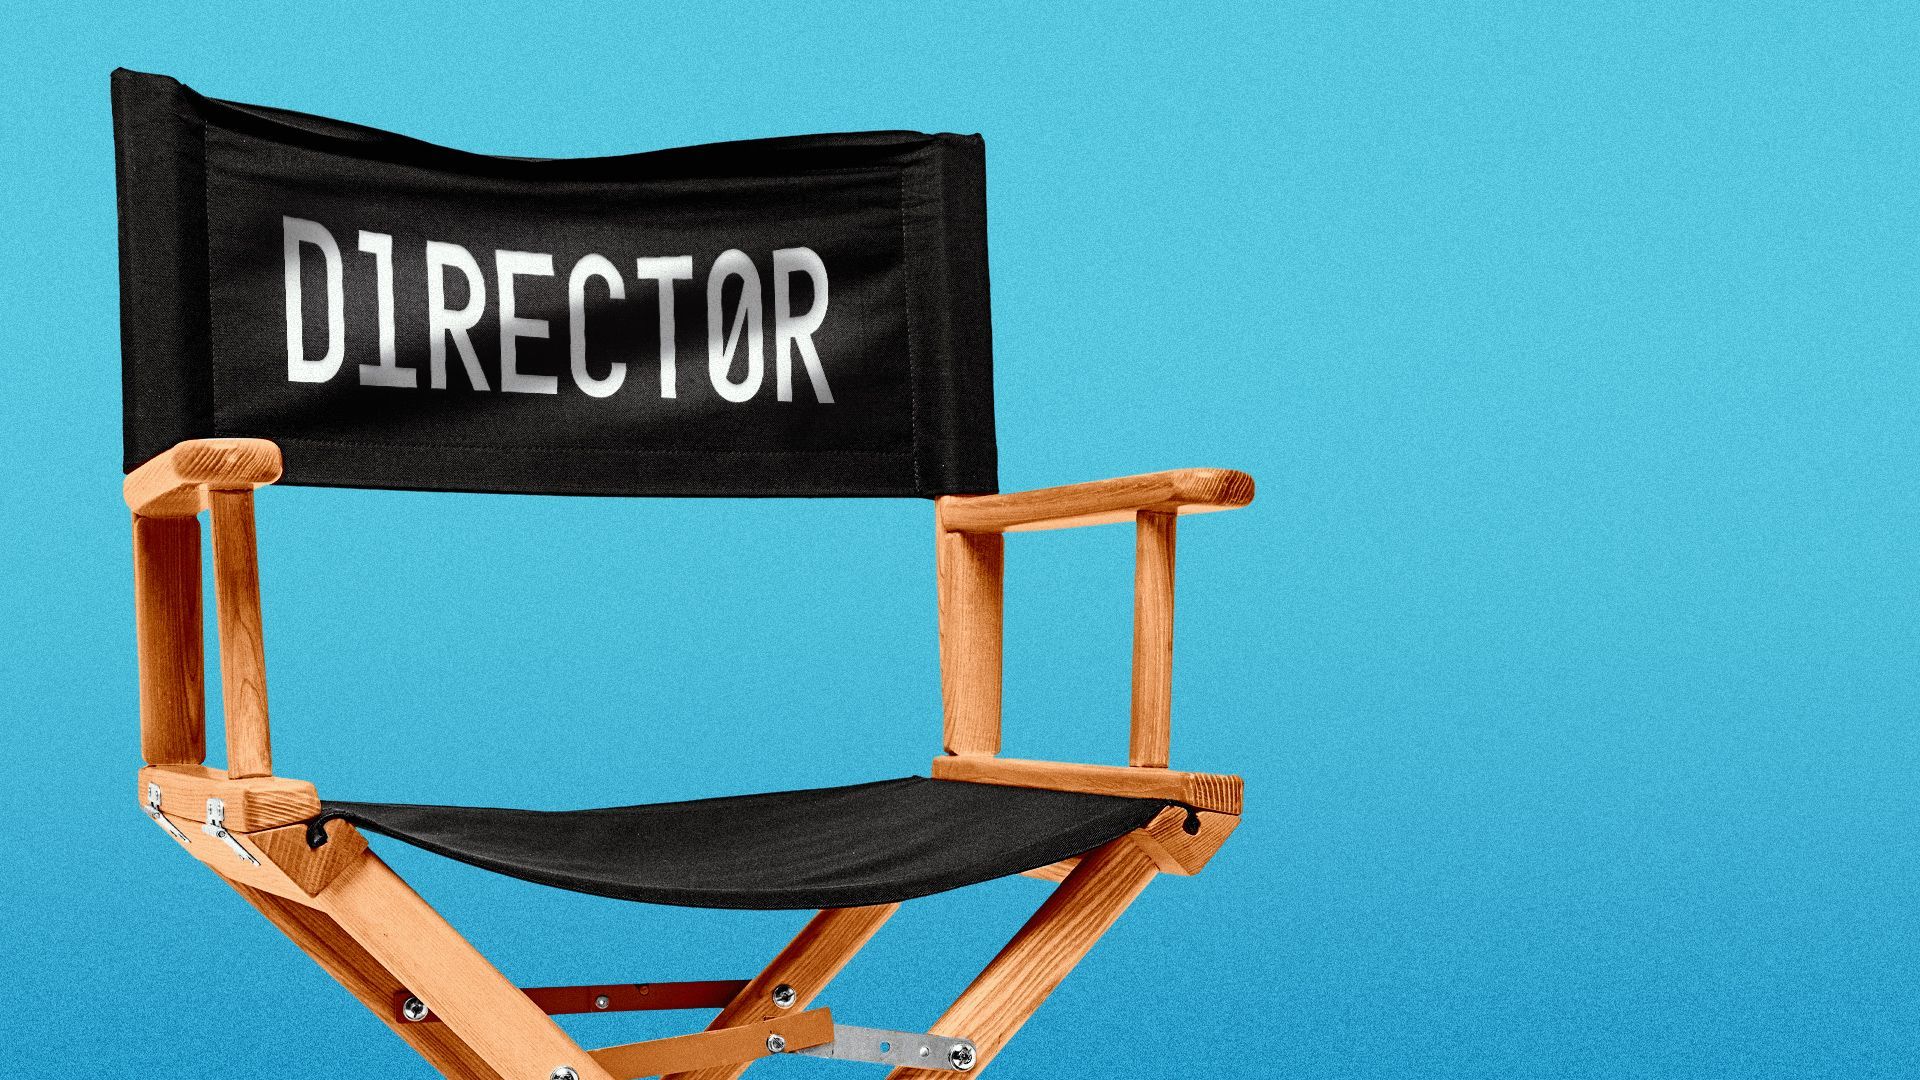 Illustration of a director's chair with the word "director" spelled partially using binary.